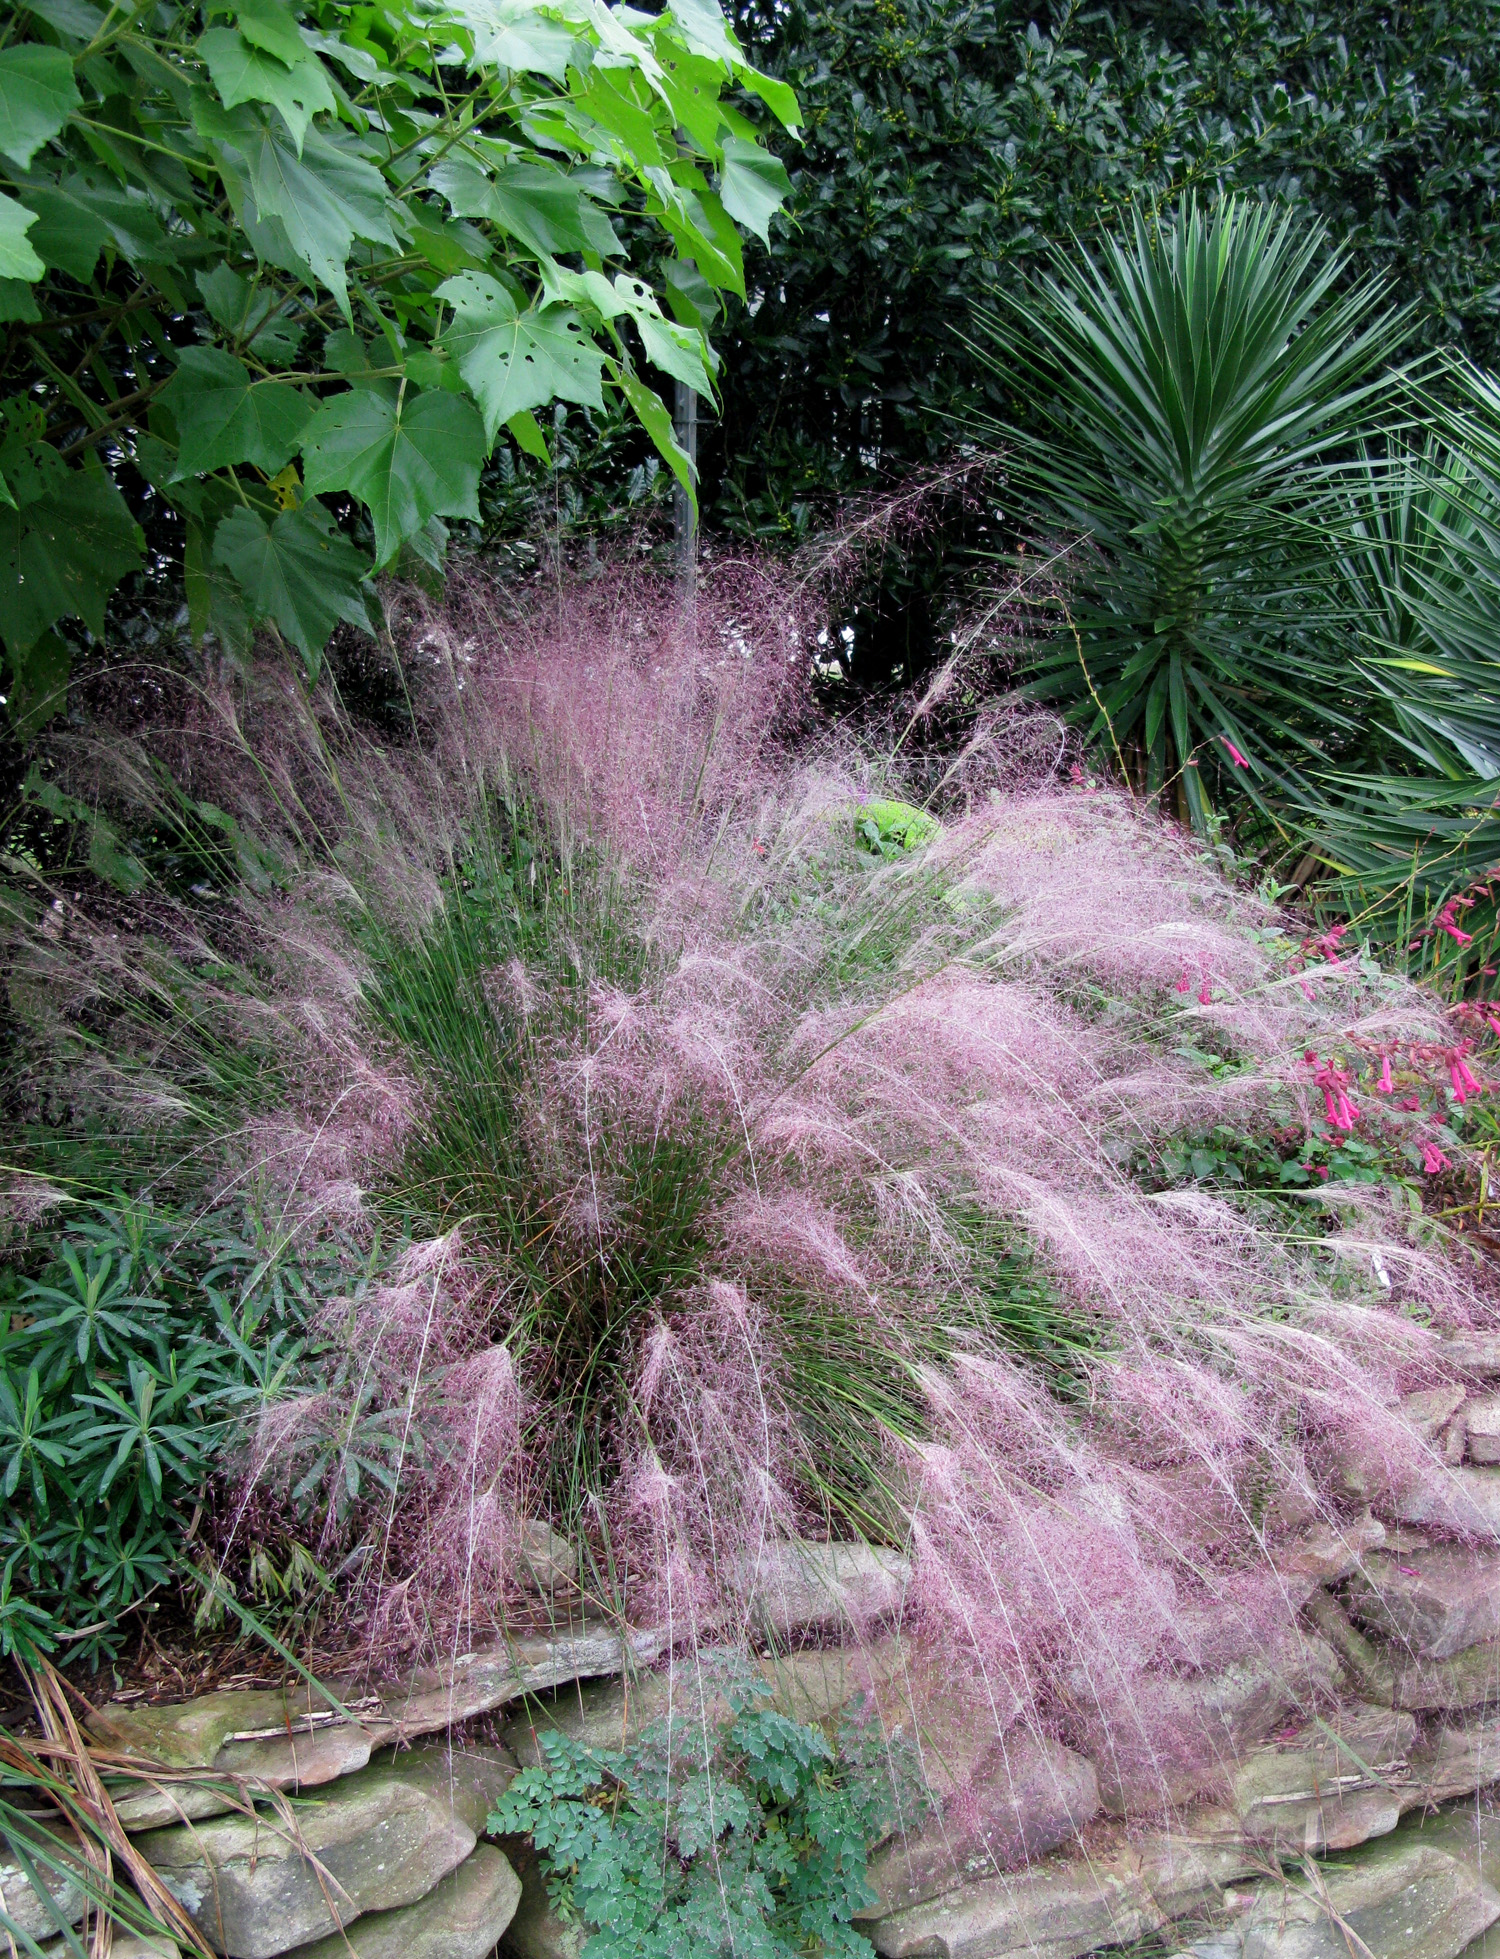 dig deeper into muhly grasses, the genus muhlenbergia.